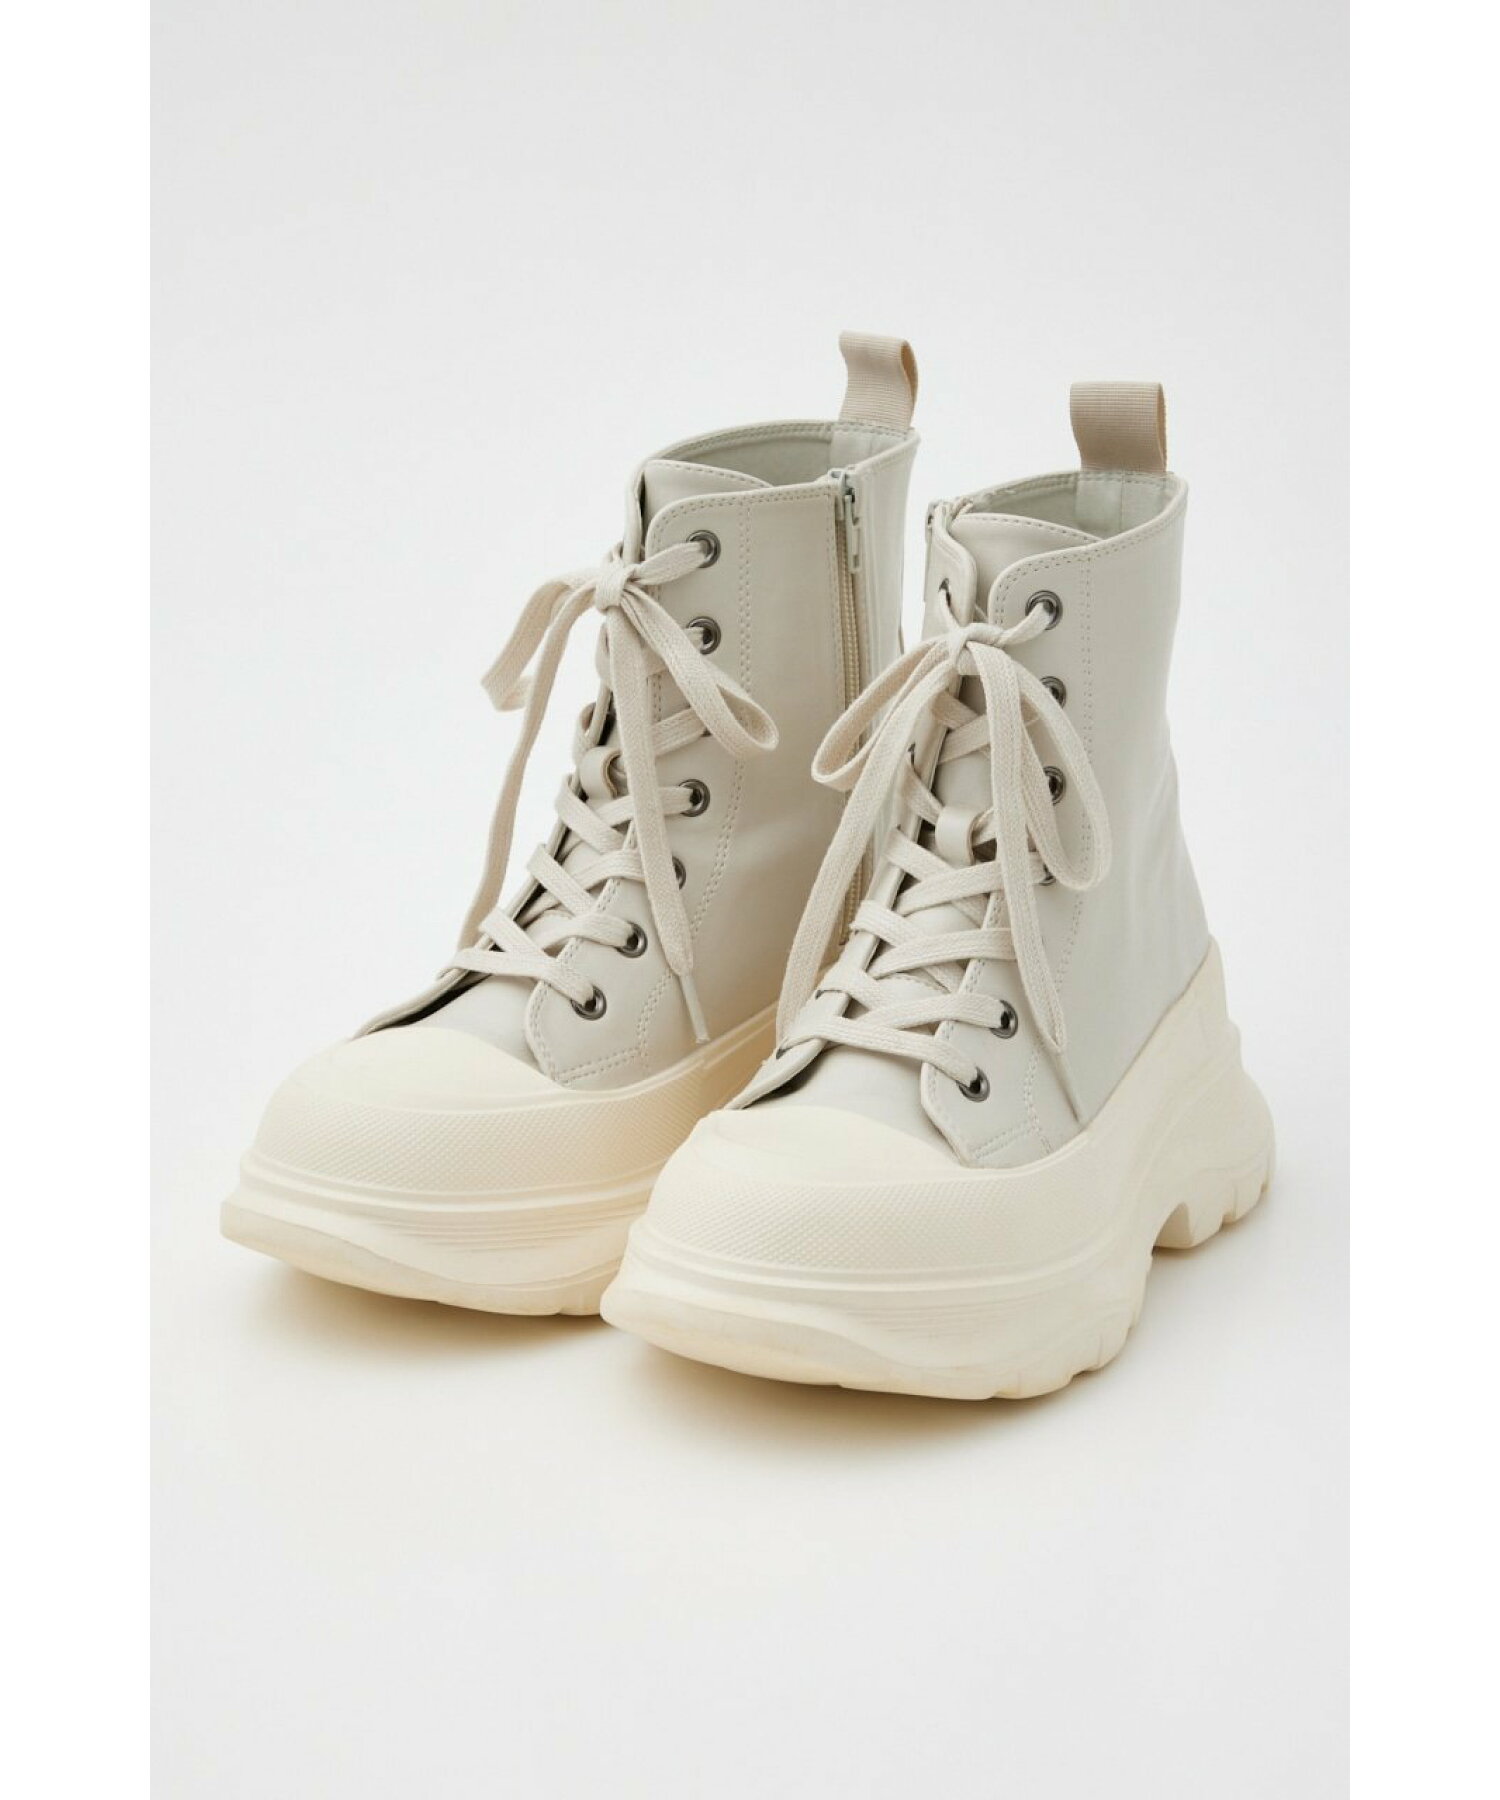 LACE UP SNEAKER BOOTS